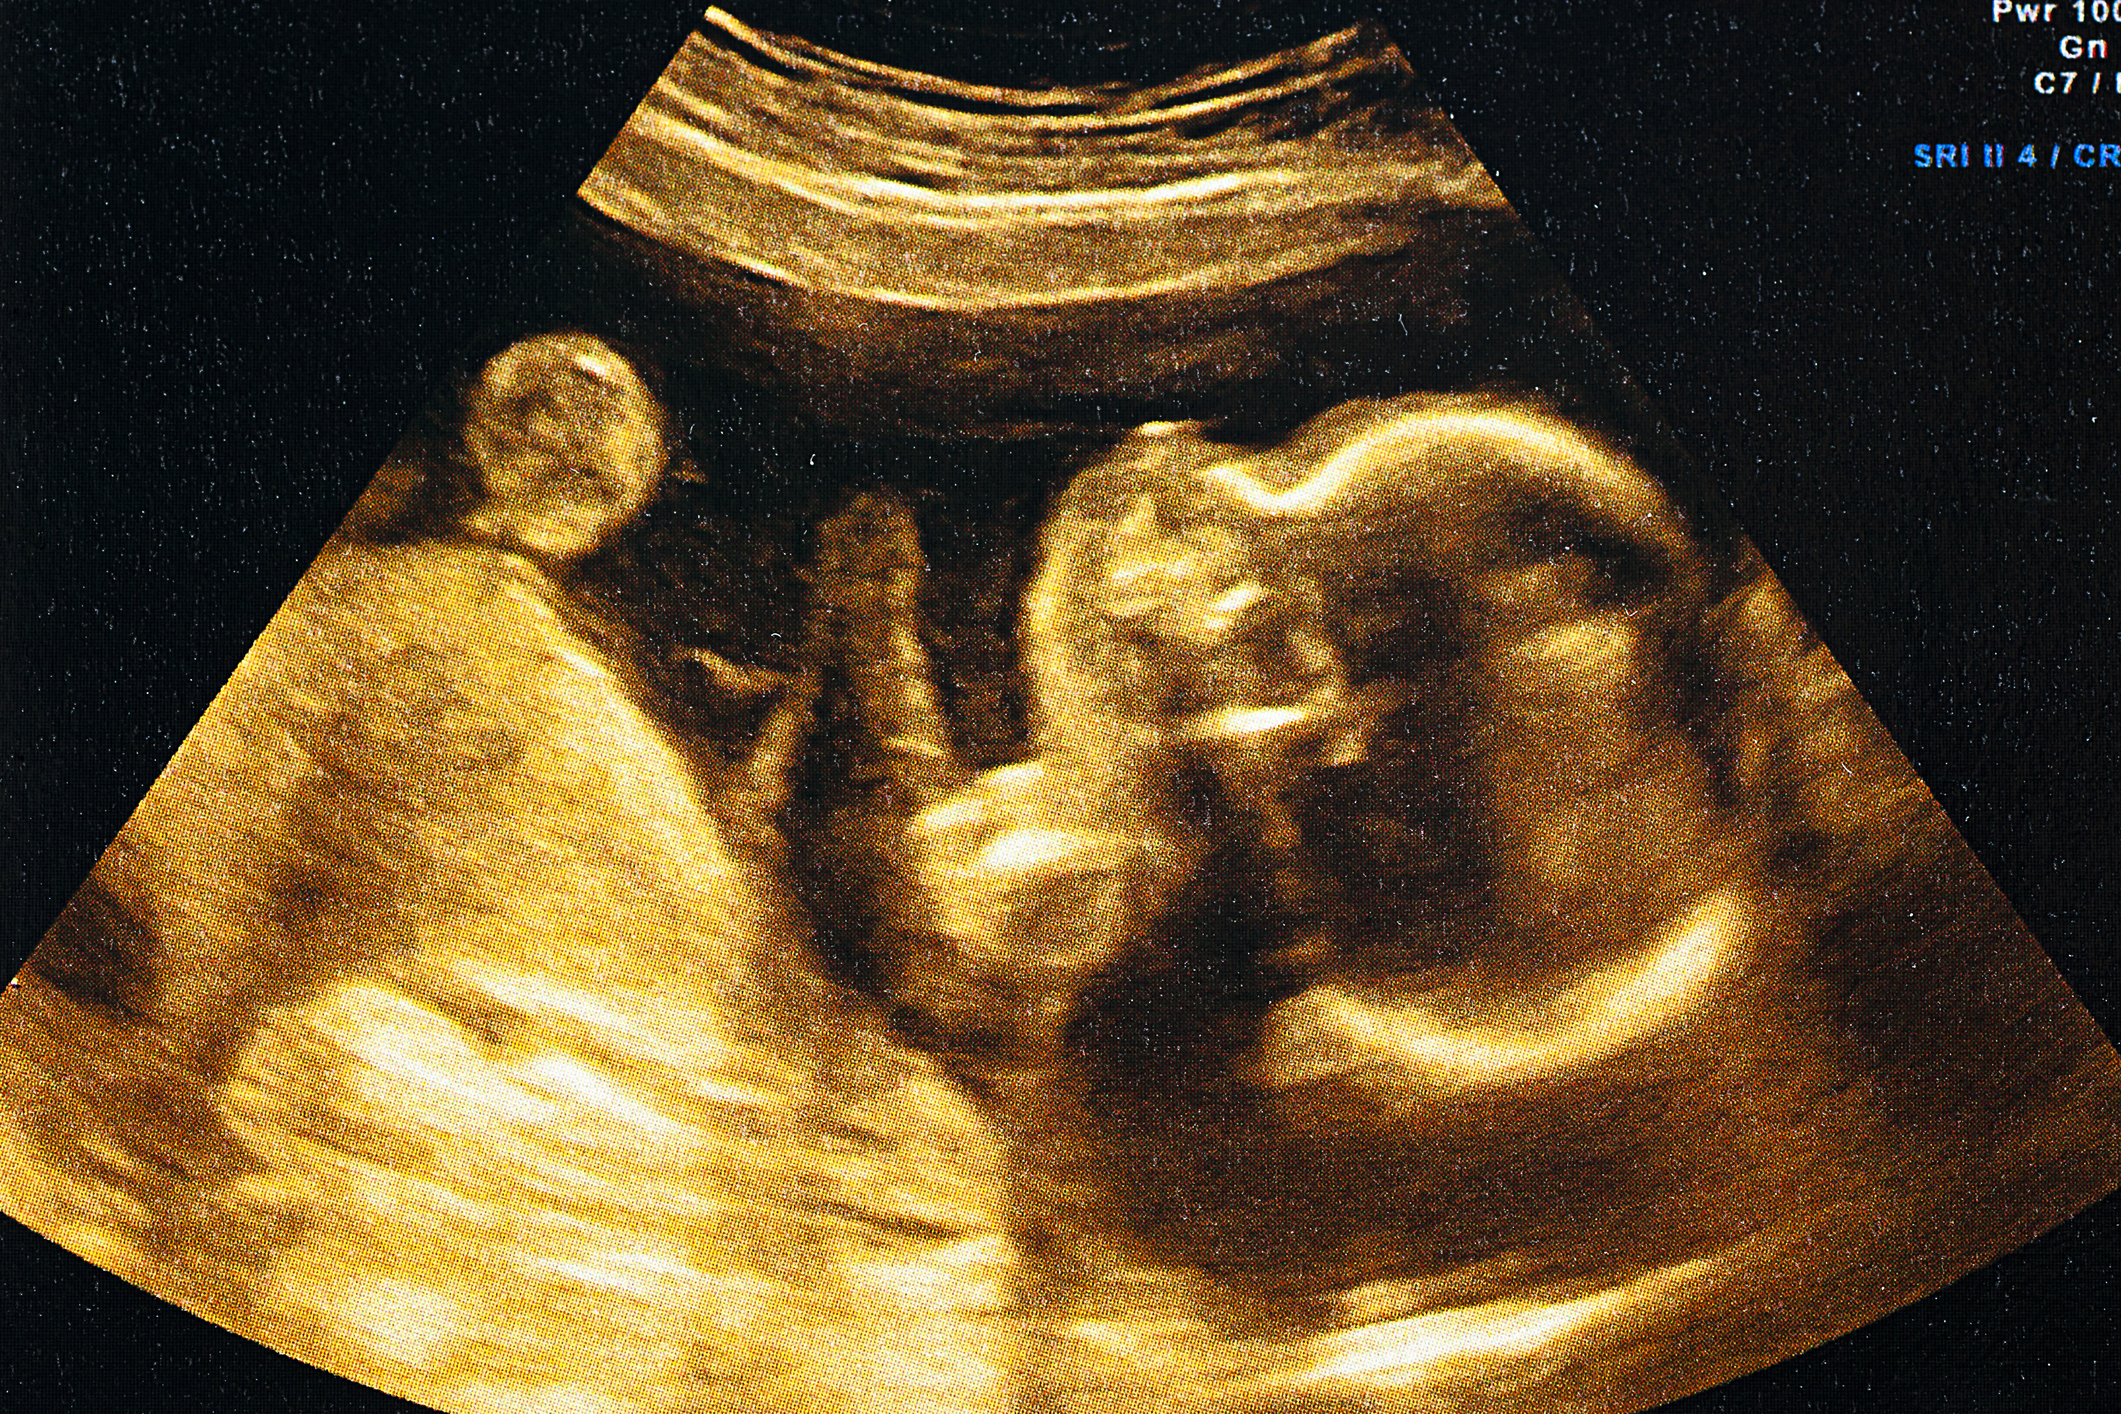 Ultrasound image showing a developing baby in the womb, featured in an article on Sex &amp;amp; Love